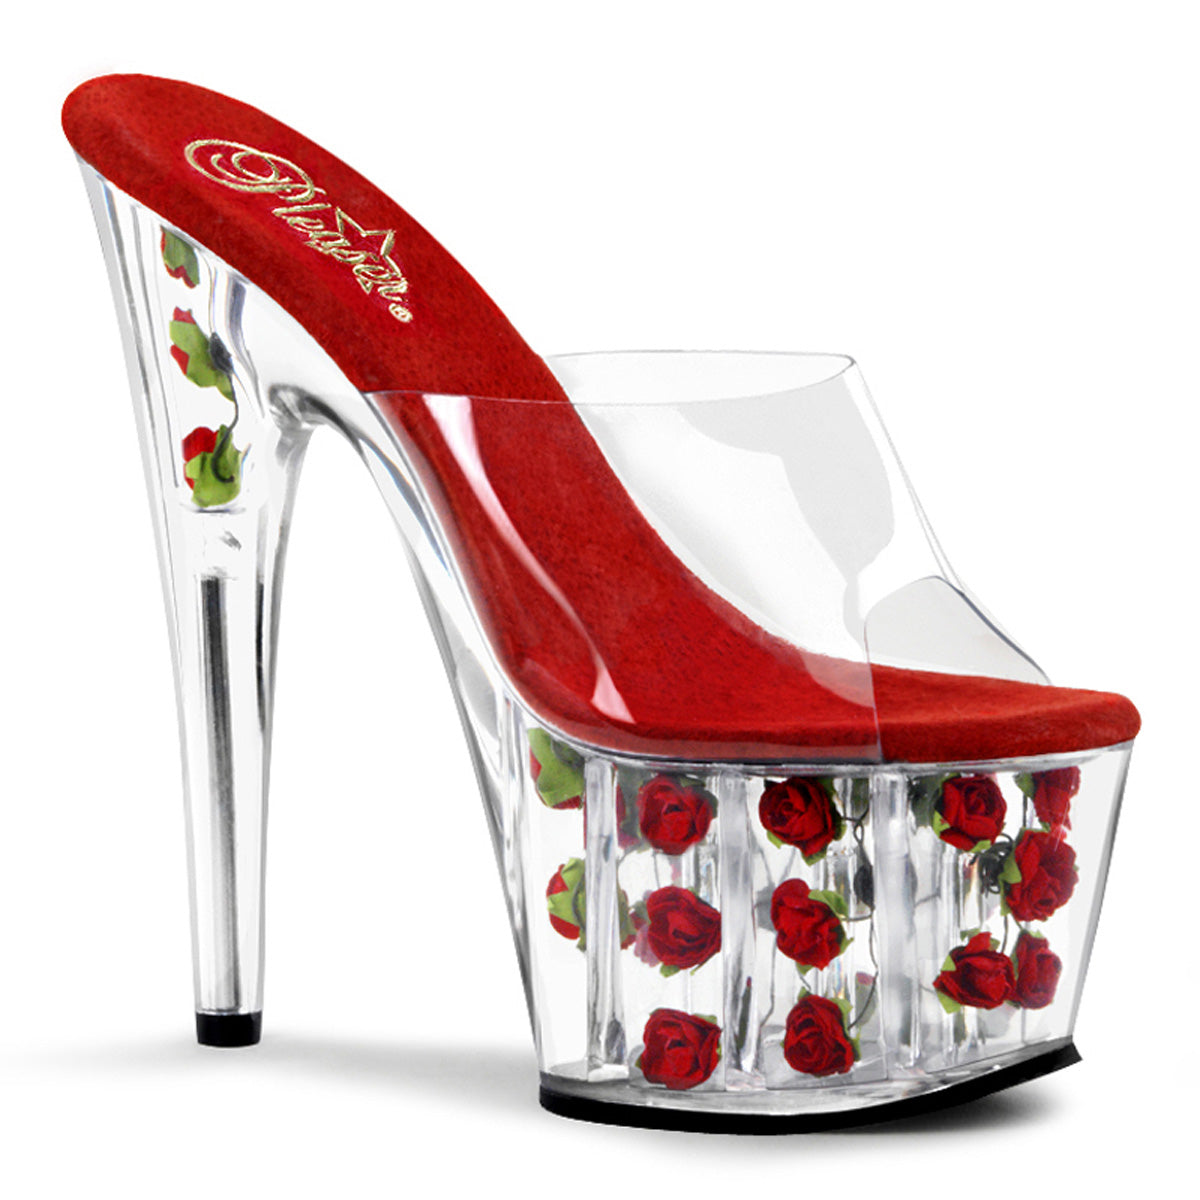 ADORE-701FL 7" Heel Clear and Red Flowers Pole Dancer Shoes